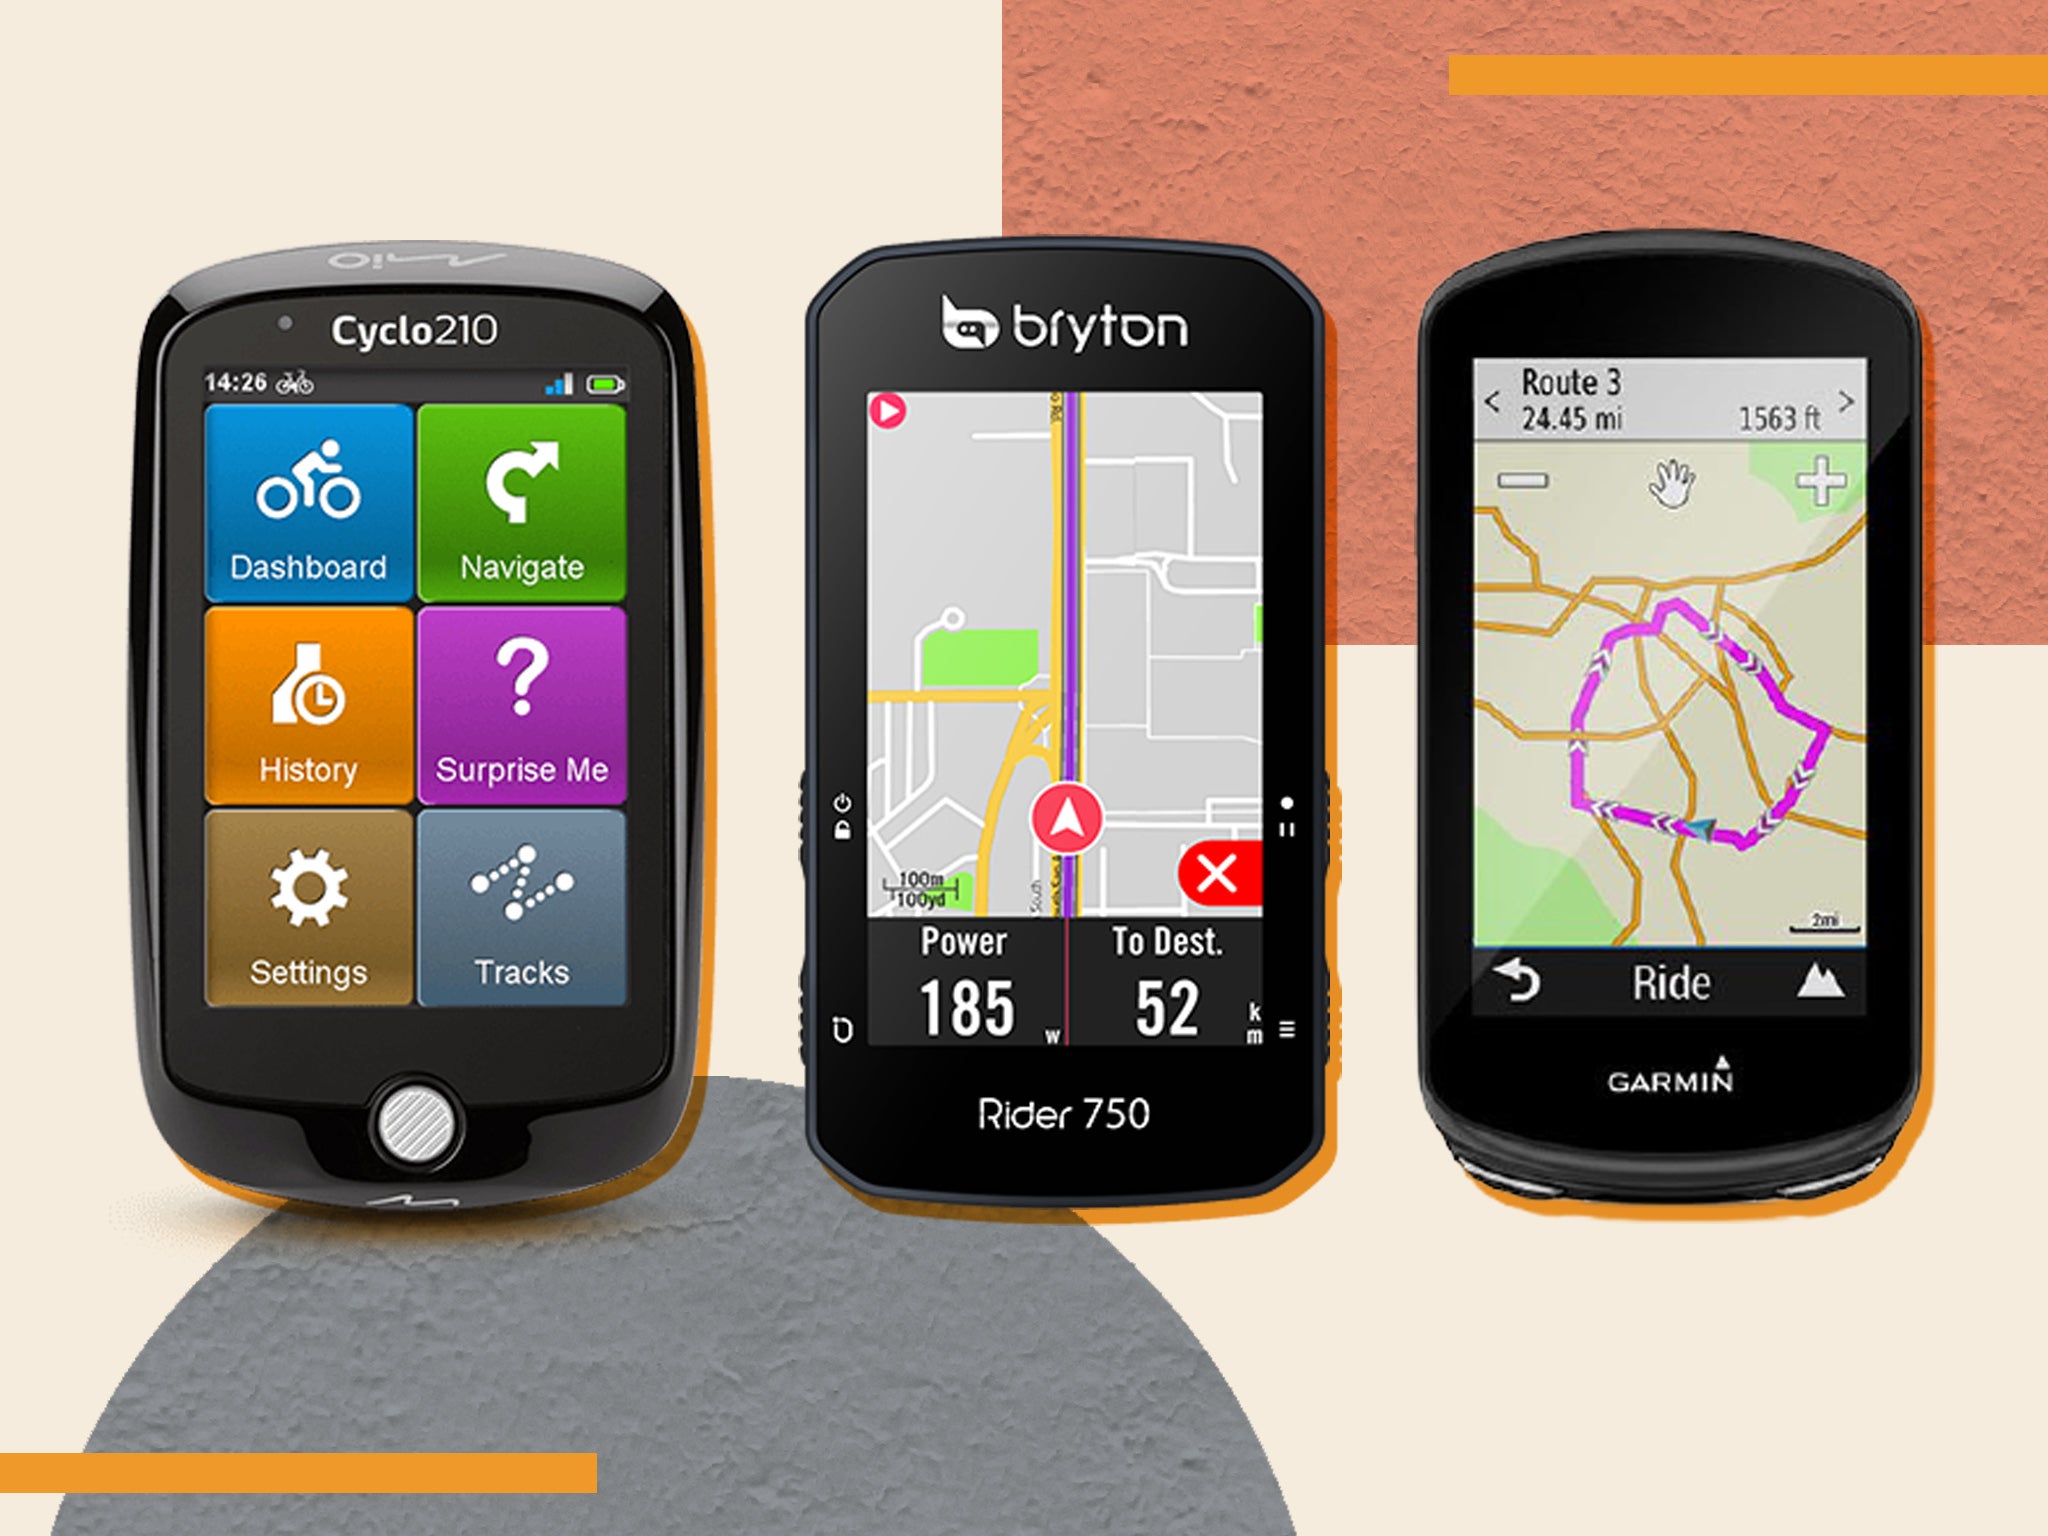 Many GPS computers integrate with the fitness app Strava, so you can see your riding data in real time